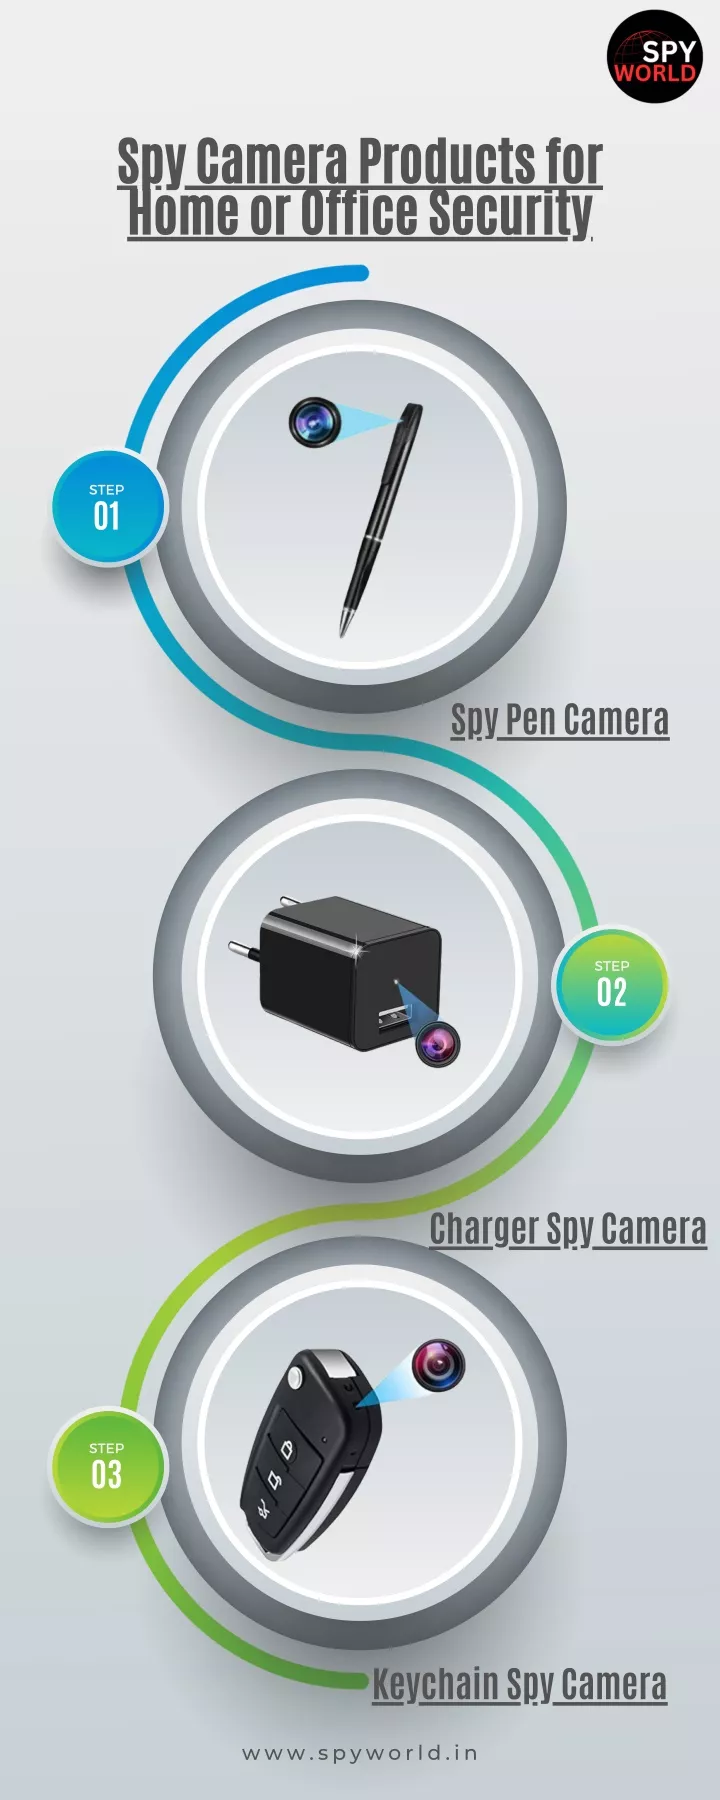 spy camera products for home or office security